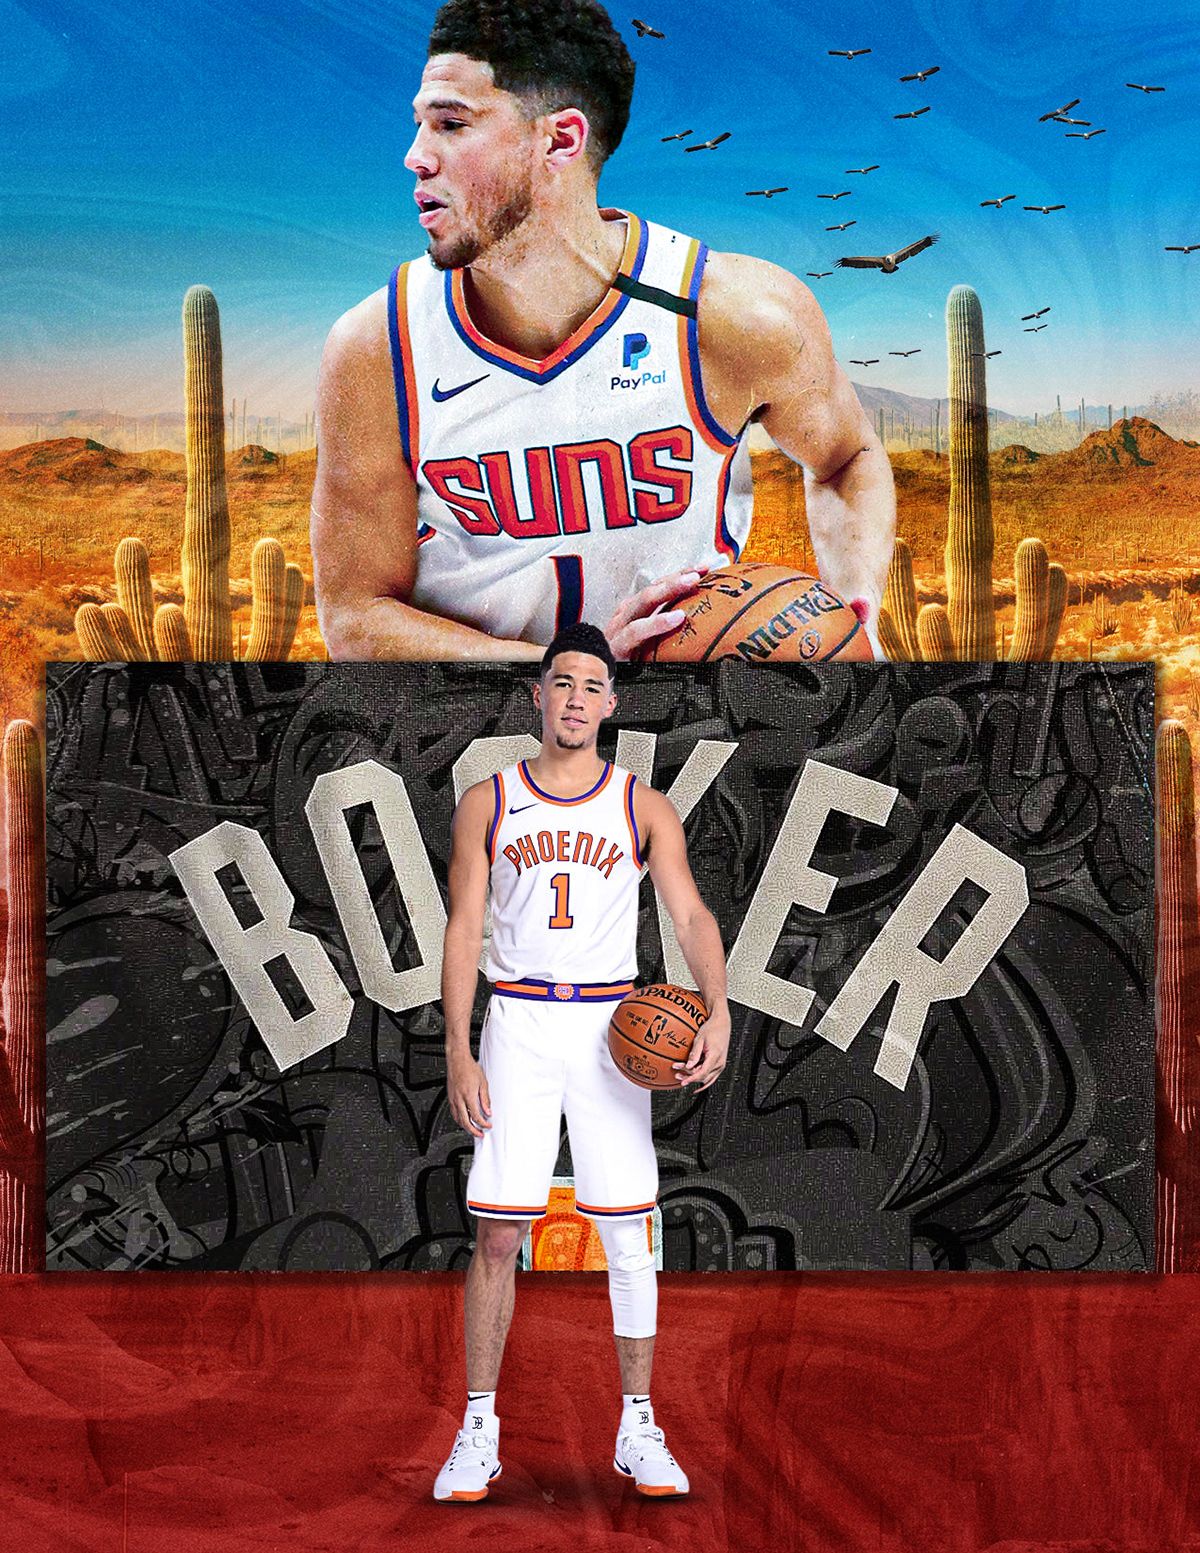 GAMEDAY Heres a Devin Booker phone wallpaper for you Should fit most  screens if you cropzoom Go Suns Lets get this W tonight baby  rsuns